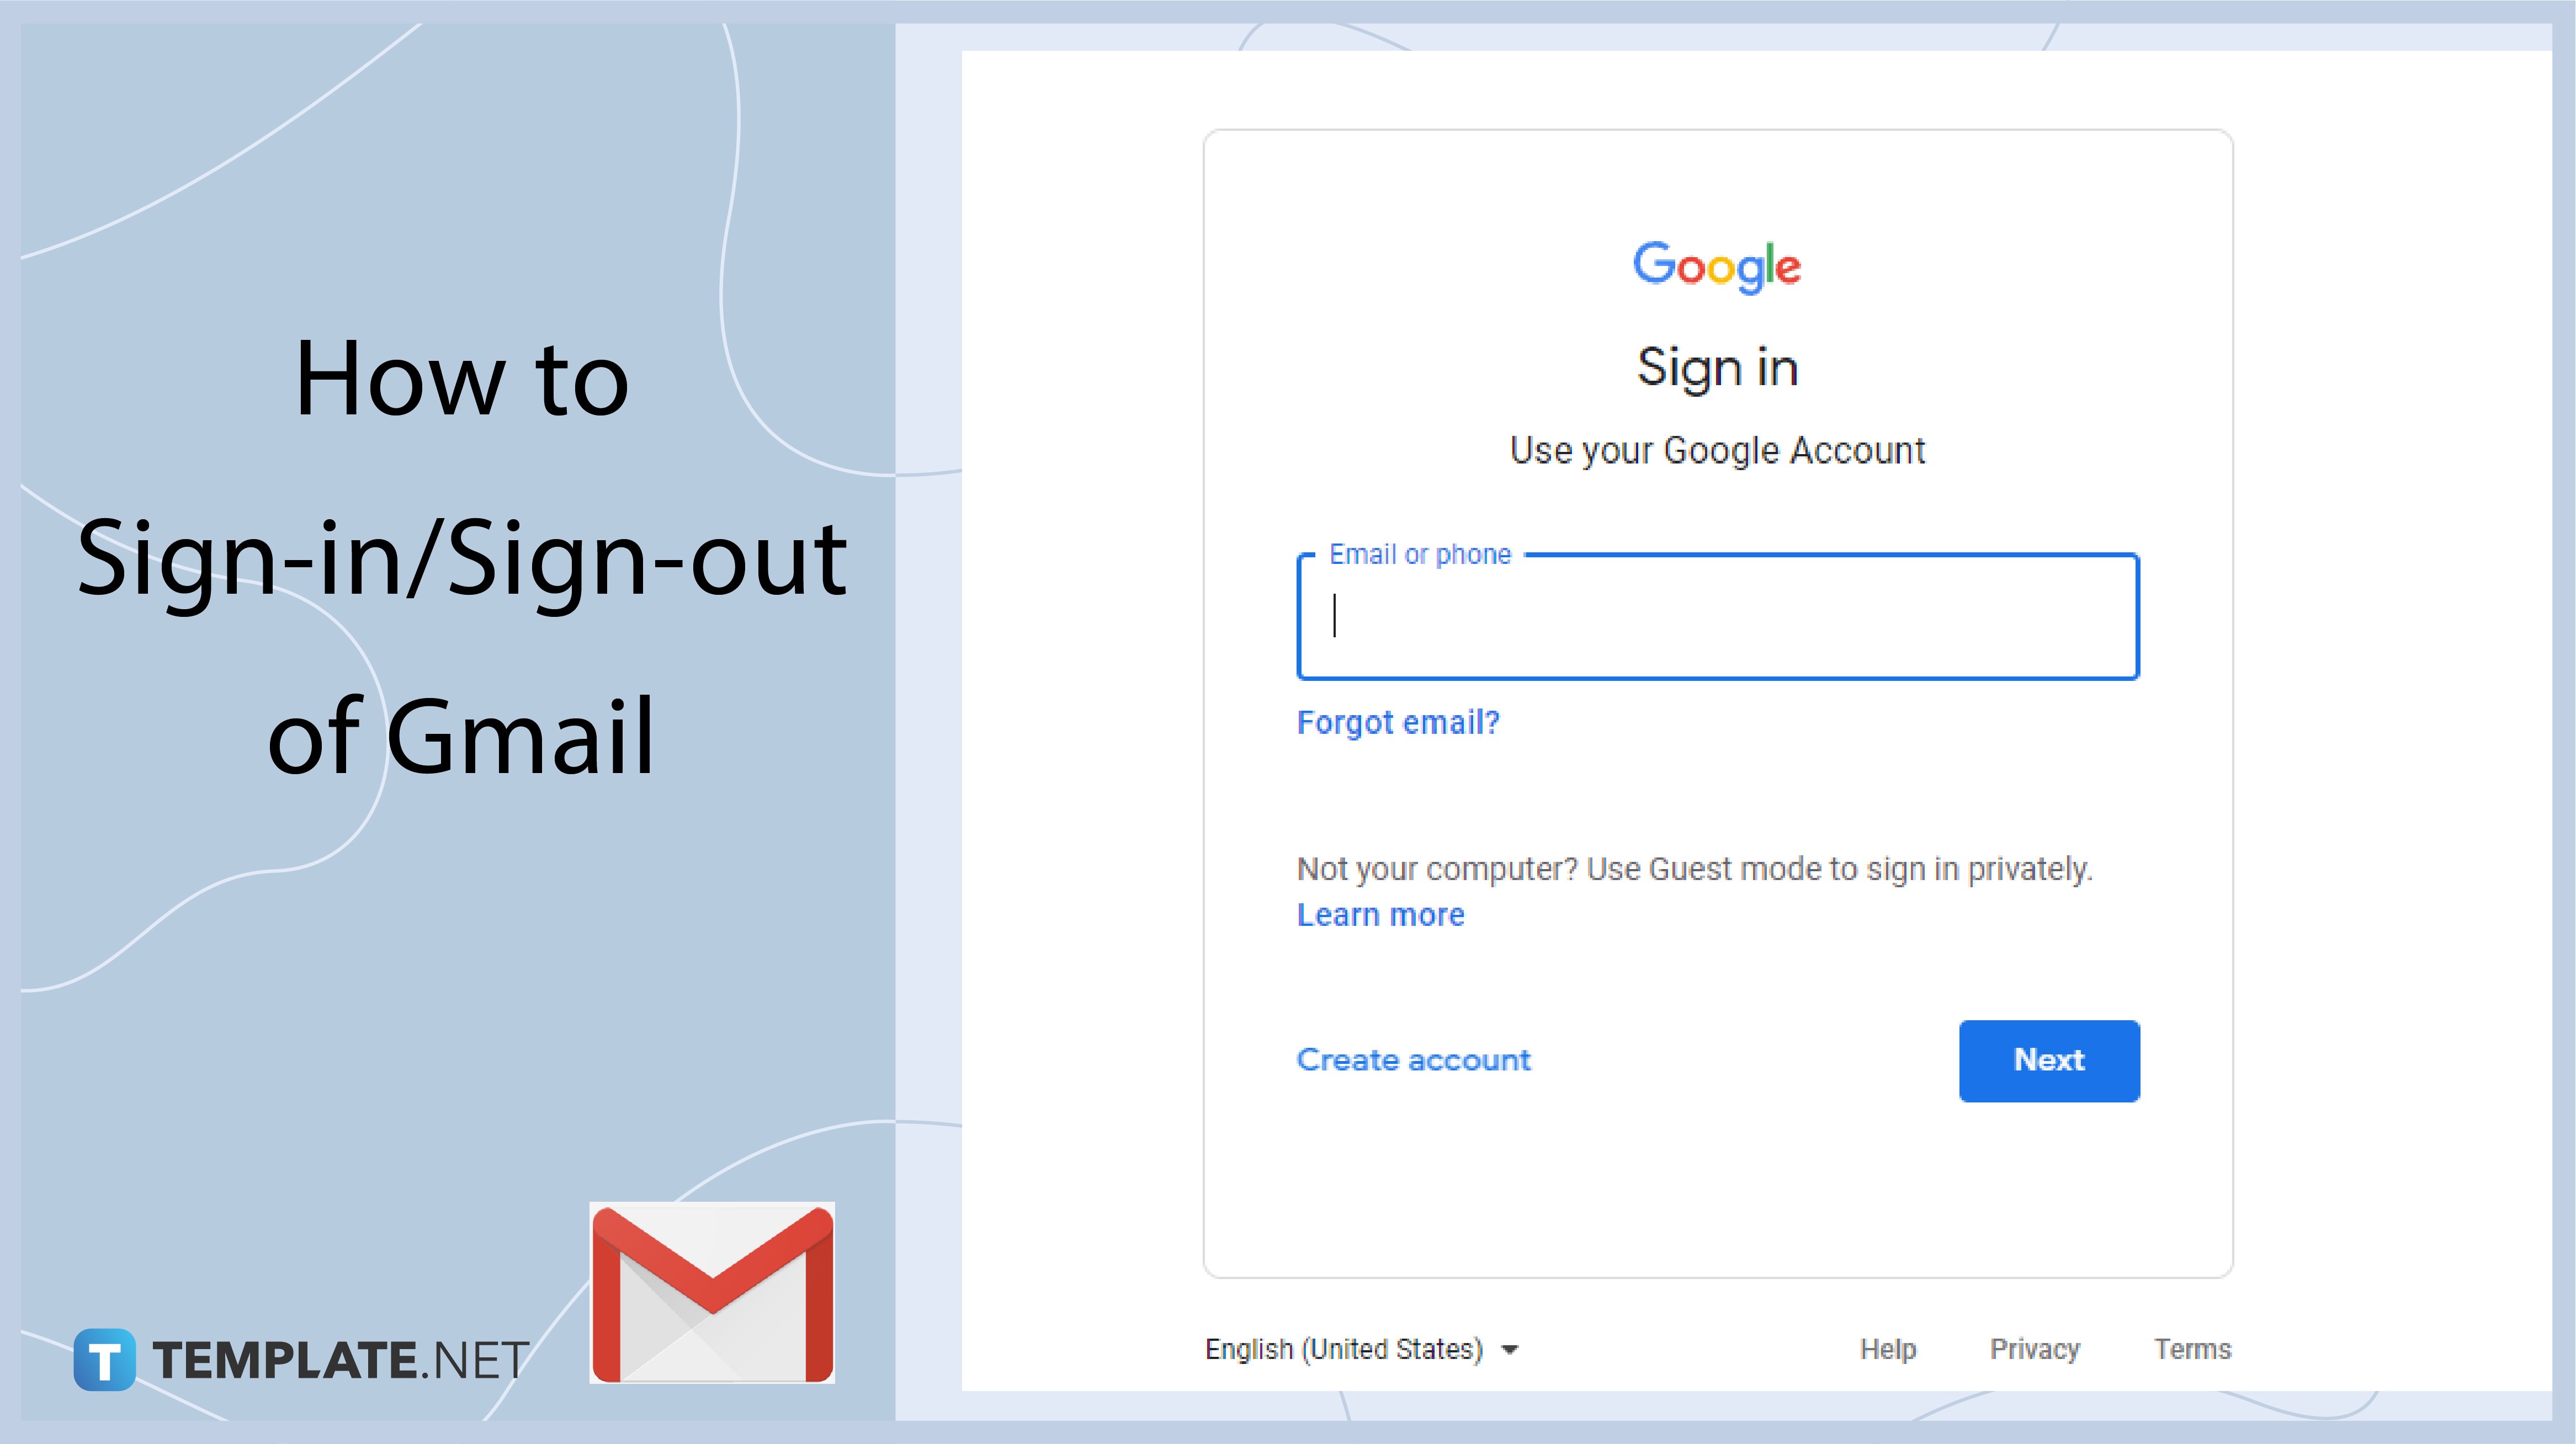 how-to-sign-in-sign-out-of-gmail-01